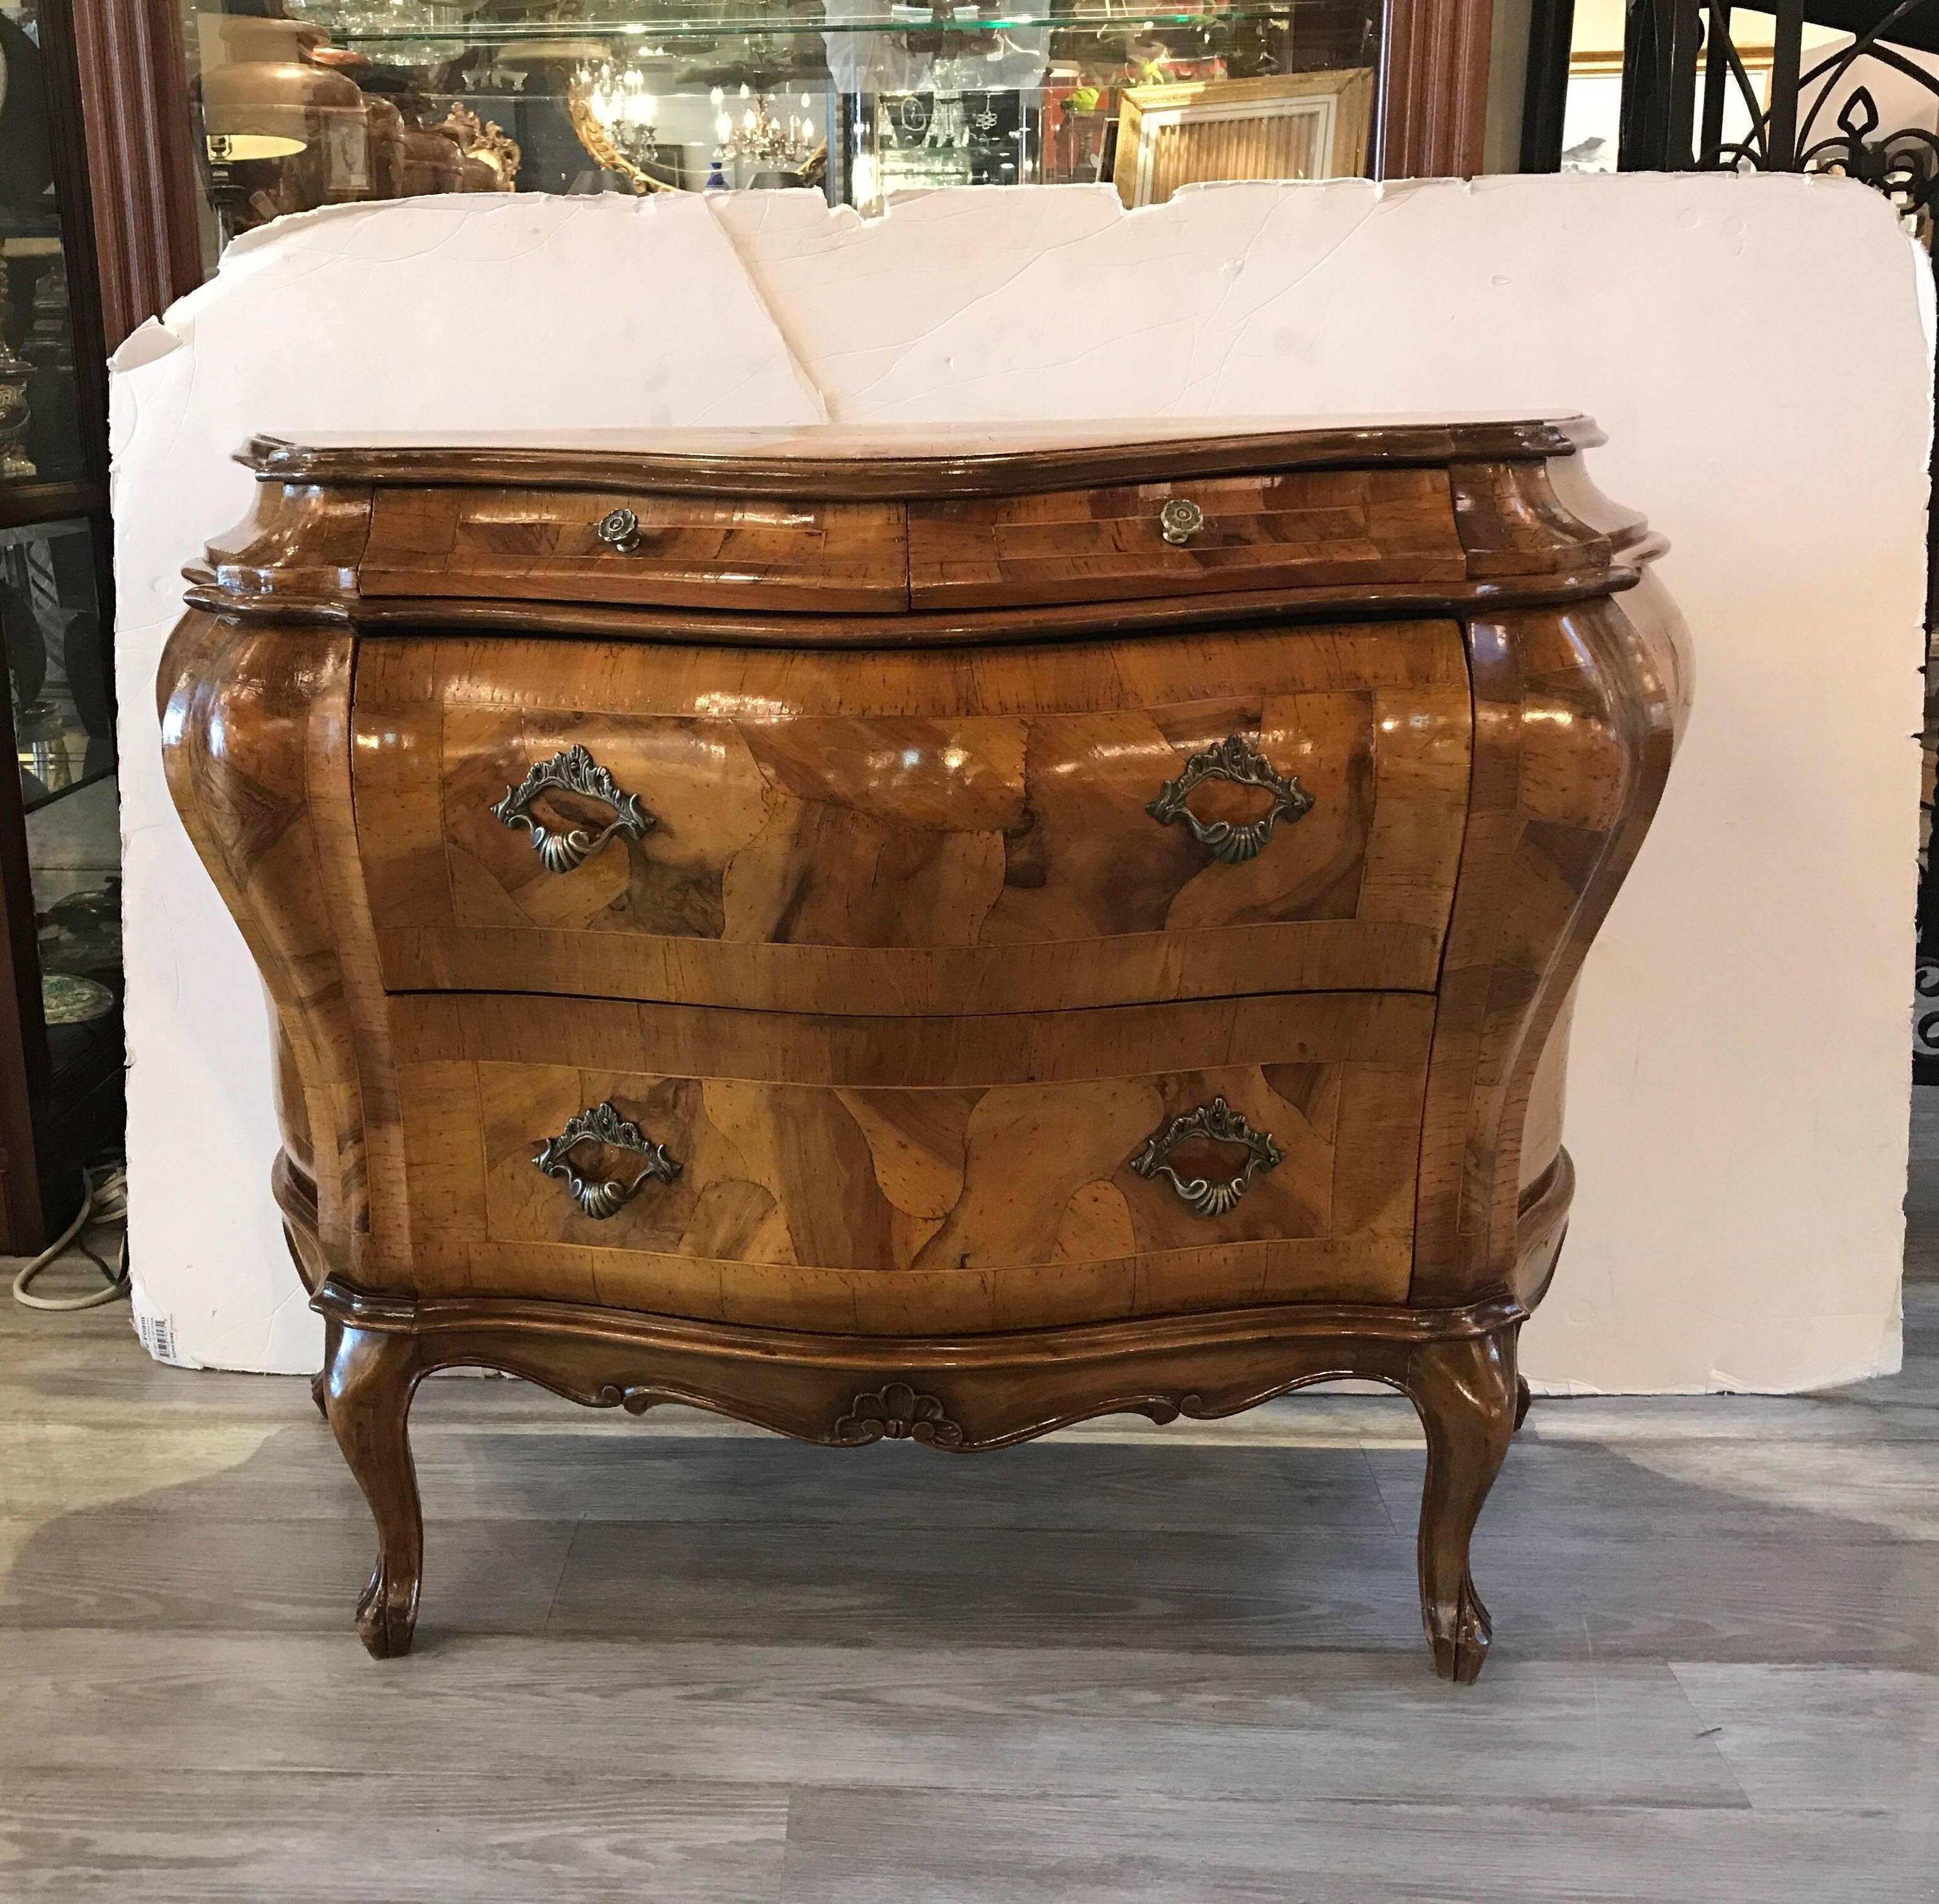 A shapely pair of mid-20th century Italian olive wood bombe form commodes. Two small drawers above two larger drawers resting on cabriole legs. The wood is a highly figurative olive wood in a tortoise shell pattern. The finish has a recent French